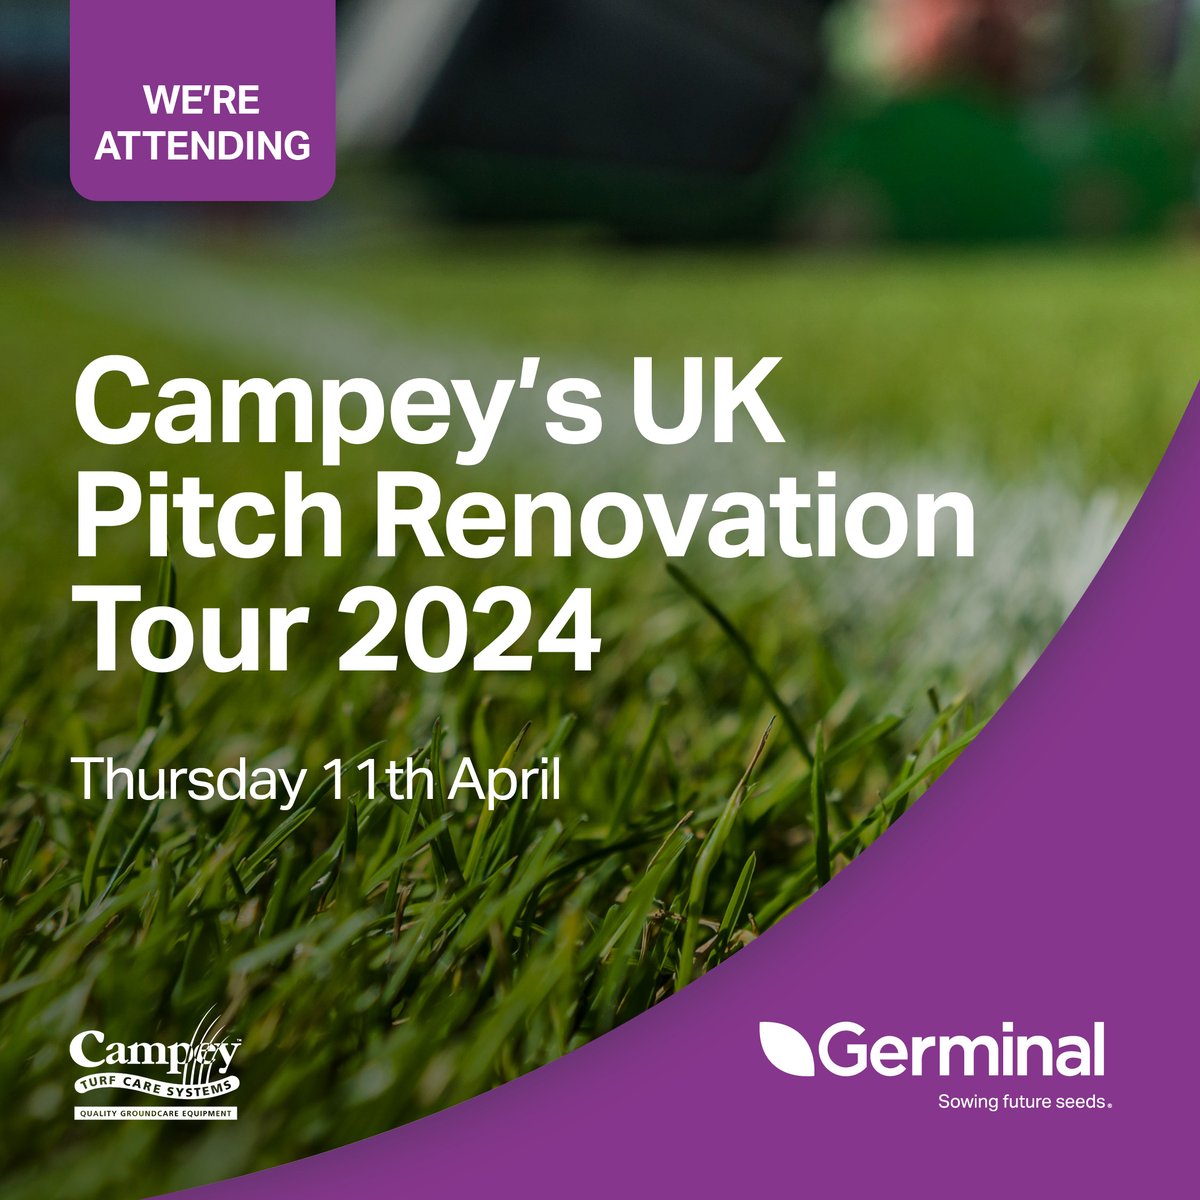 Excitement is building for Campey’s Pitch Renovation Tour! Don't miss live demos of Germinal’s A20 Premier Ryesport and a chance to get expert advice from @SandyP_Germinal on our top-performing turf varieties. Where: West Ham United Training Ground, RM7 0LU @CampeyTurfCare